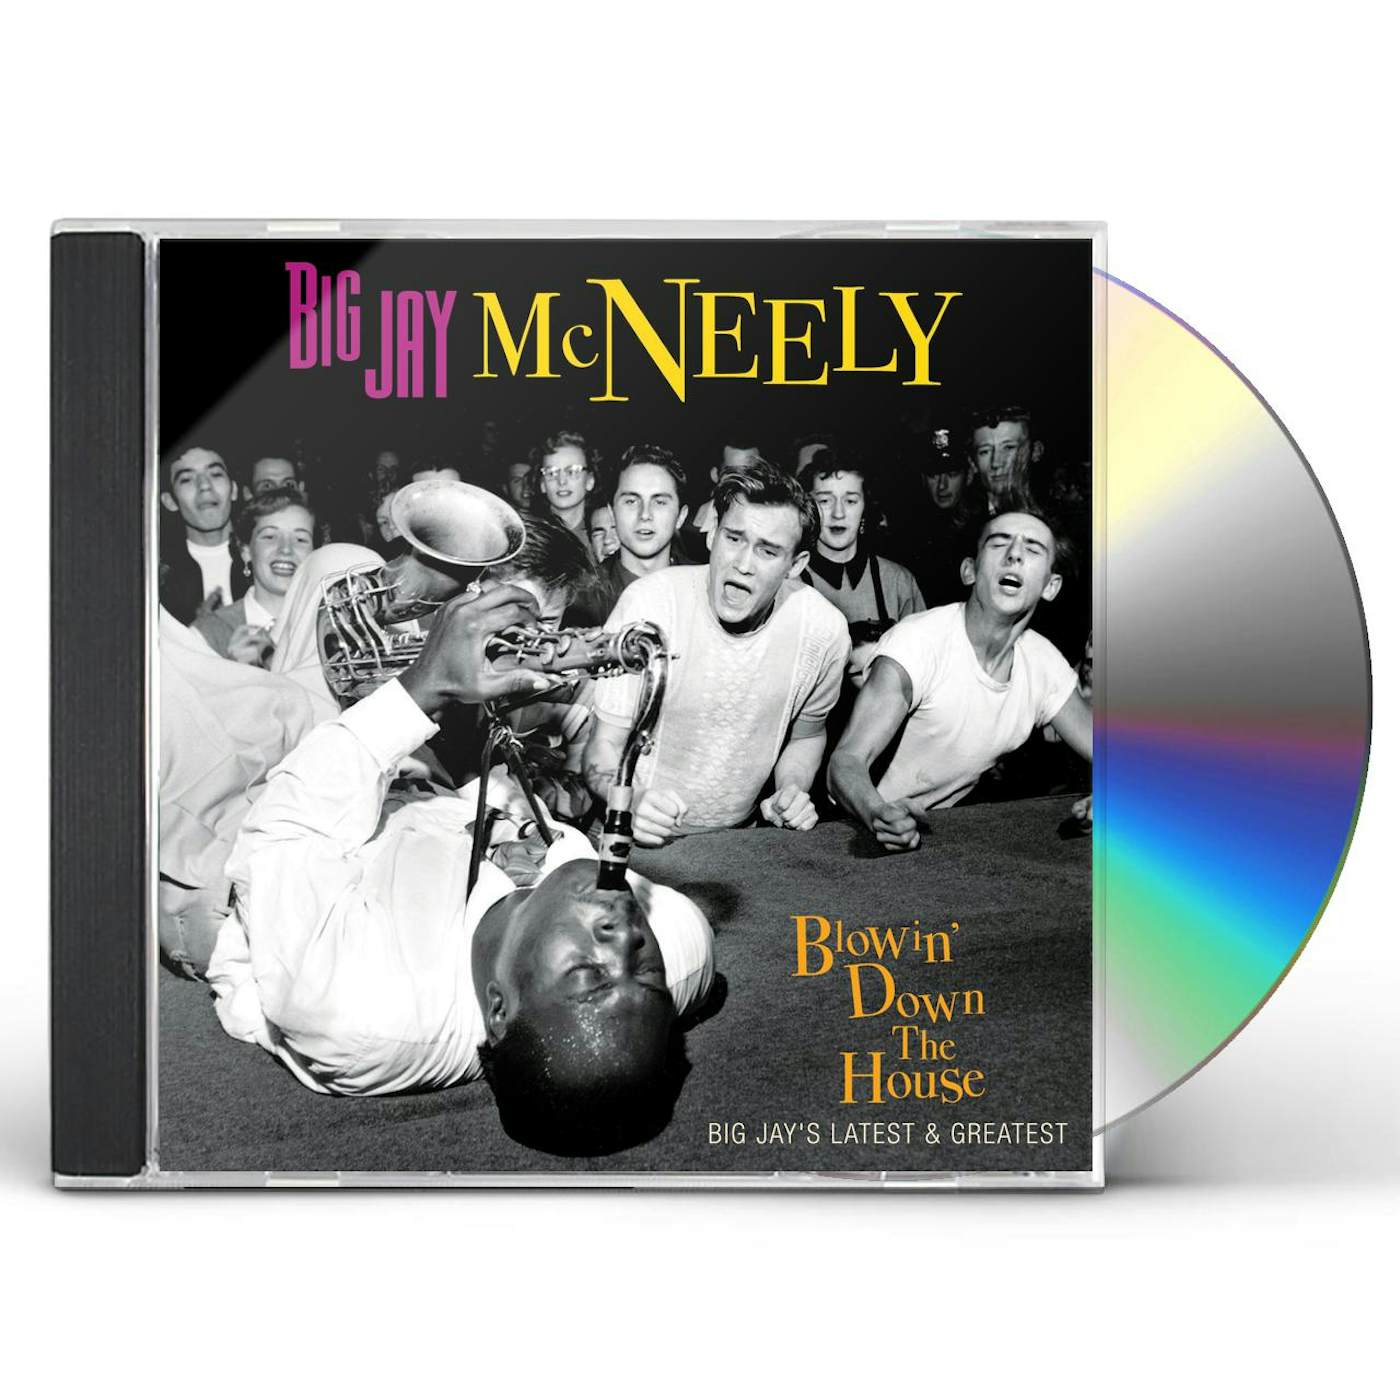 Big Jay McNeely BLOWIN' DOWN THE HOUSE-BIG JAY'S LATEST & GREATEST CD